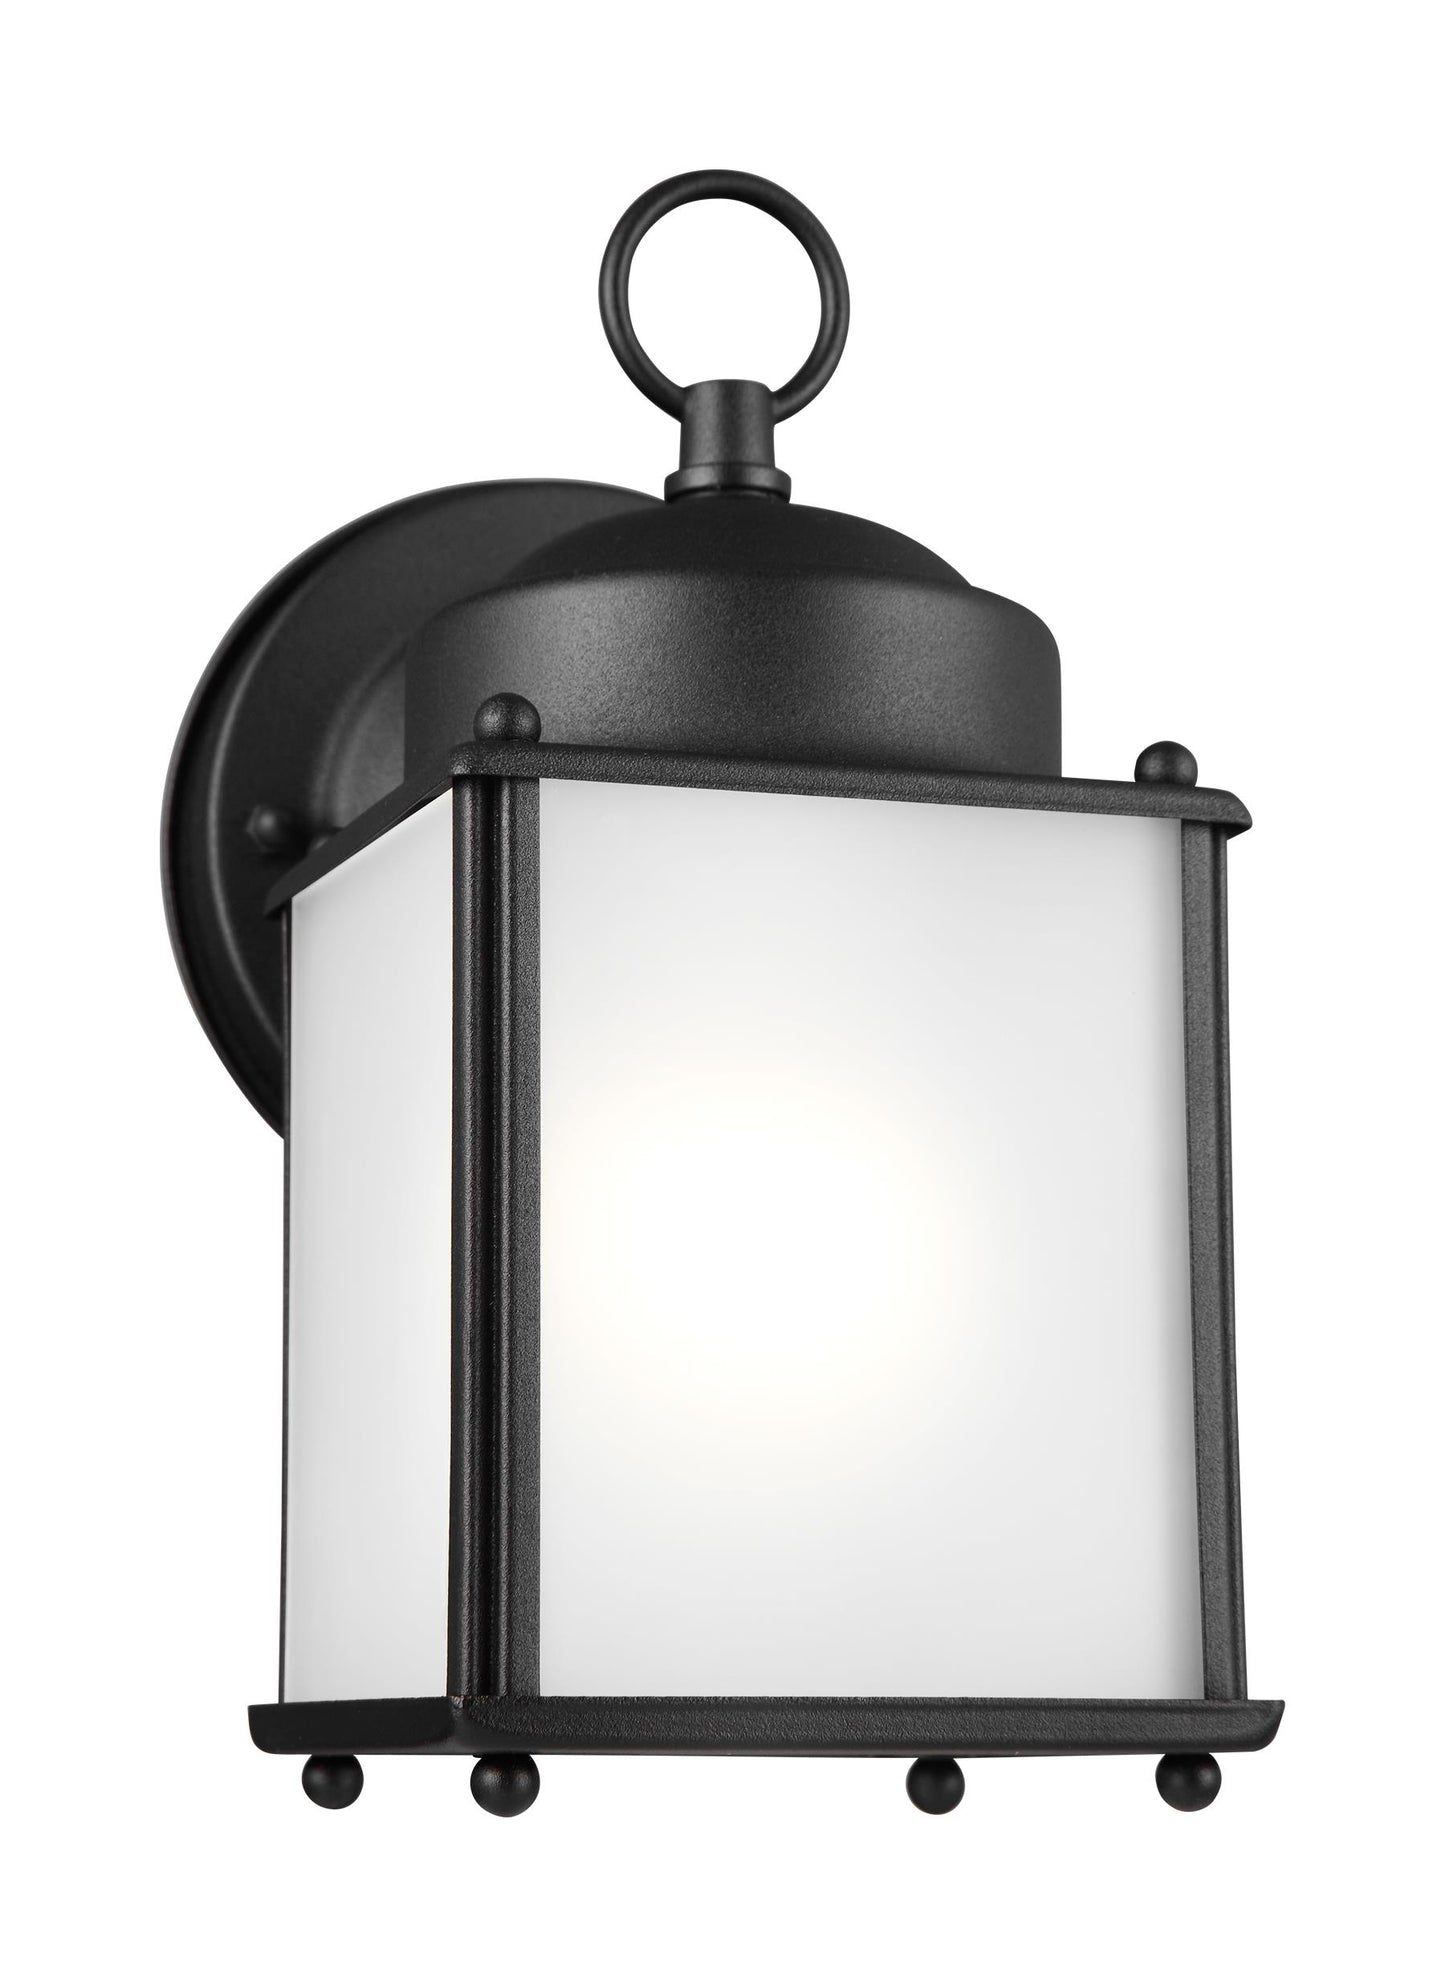 New Castle traditional 1-light outdoor exterior wall lantern sconce in black finish with clear glass panels